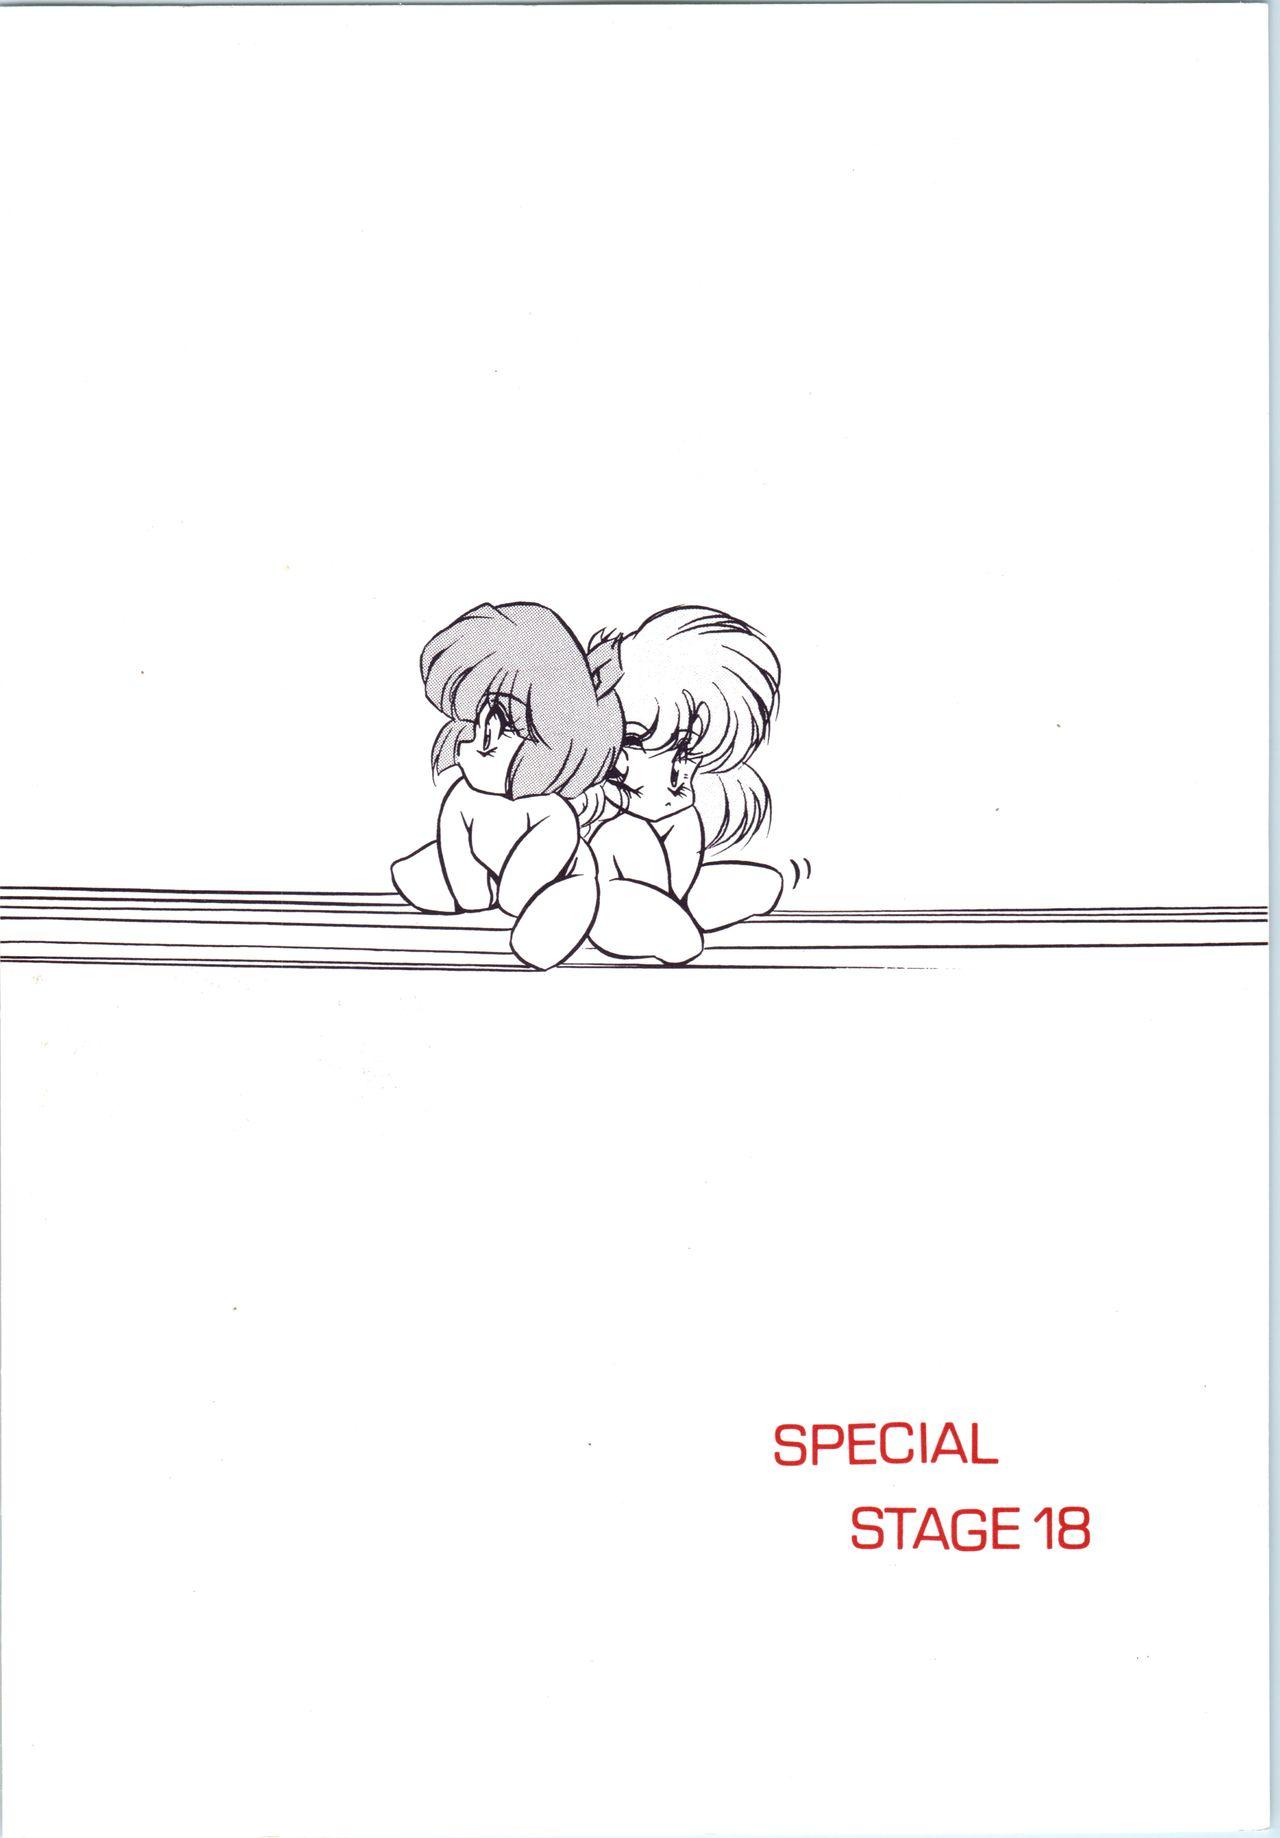 Grandma C-COMPANY SPECIAL STAGE 18 - Ranma 12 Idol project Suck - Page 58